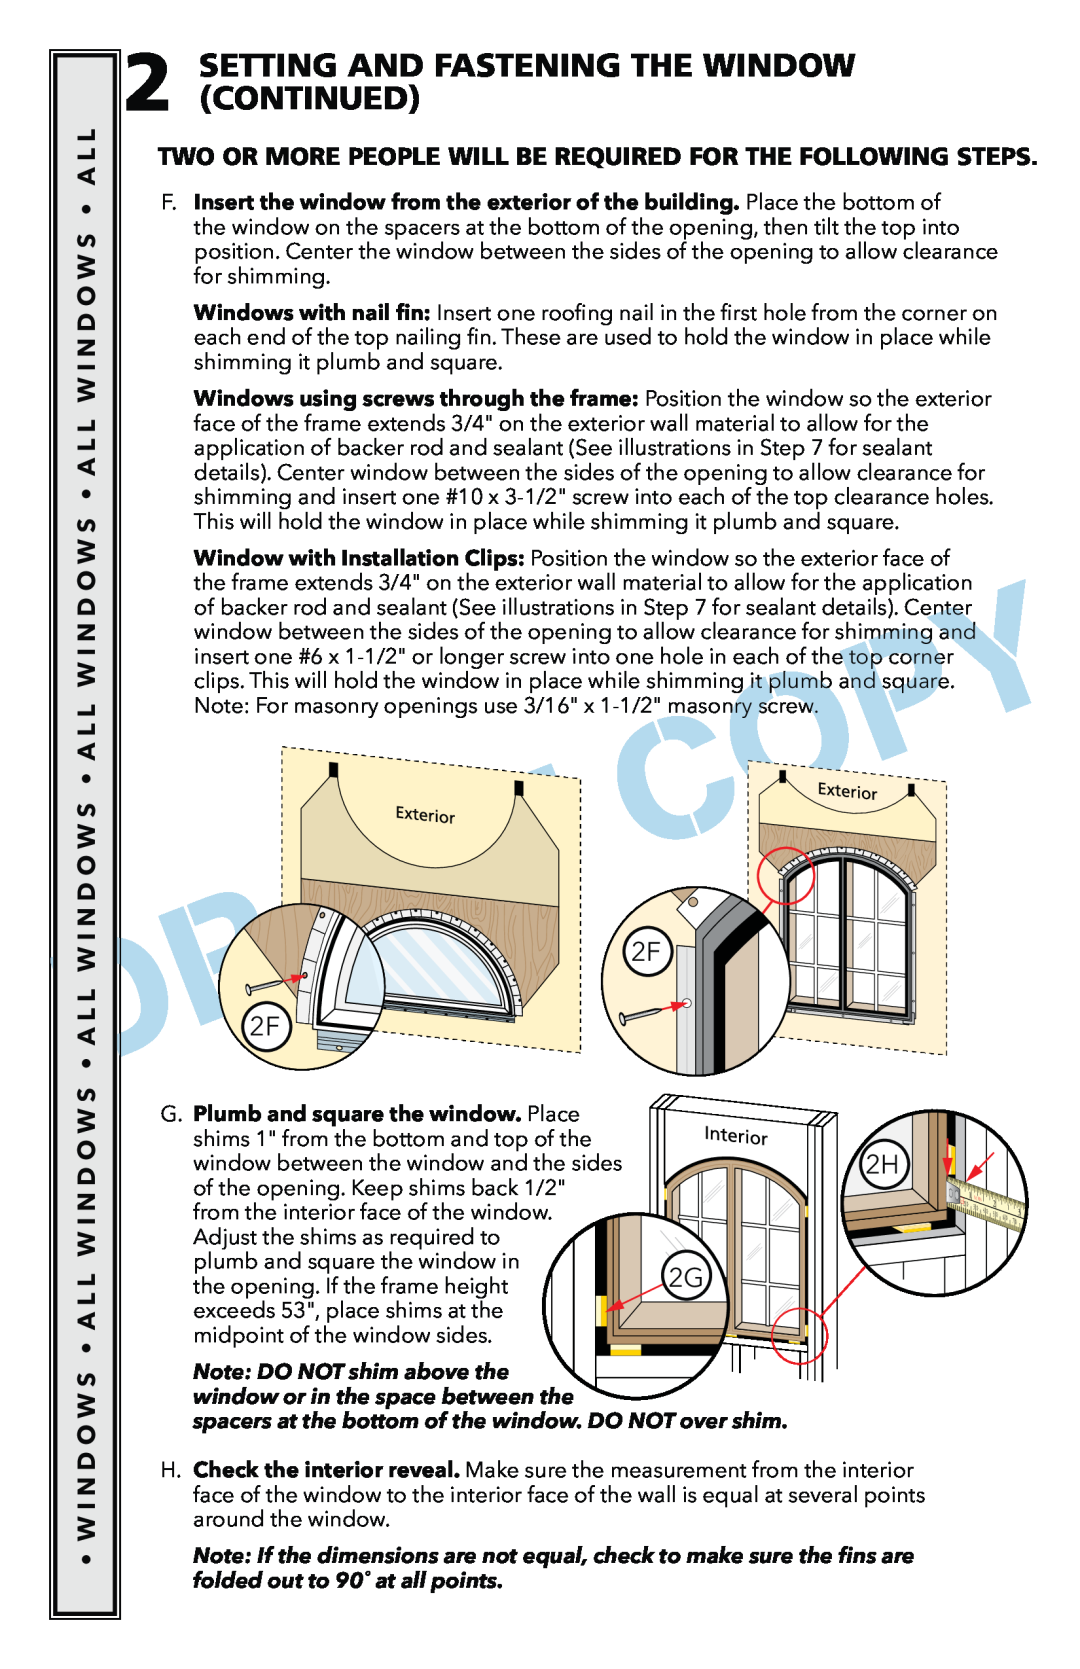 Pella 801U0103 installation instructions Setting And Fastening The Window Continued, 2FE 2F2E 